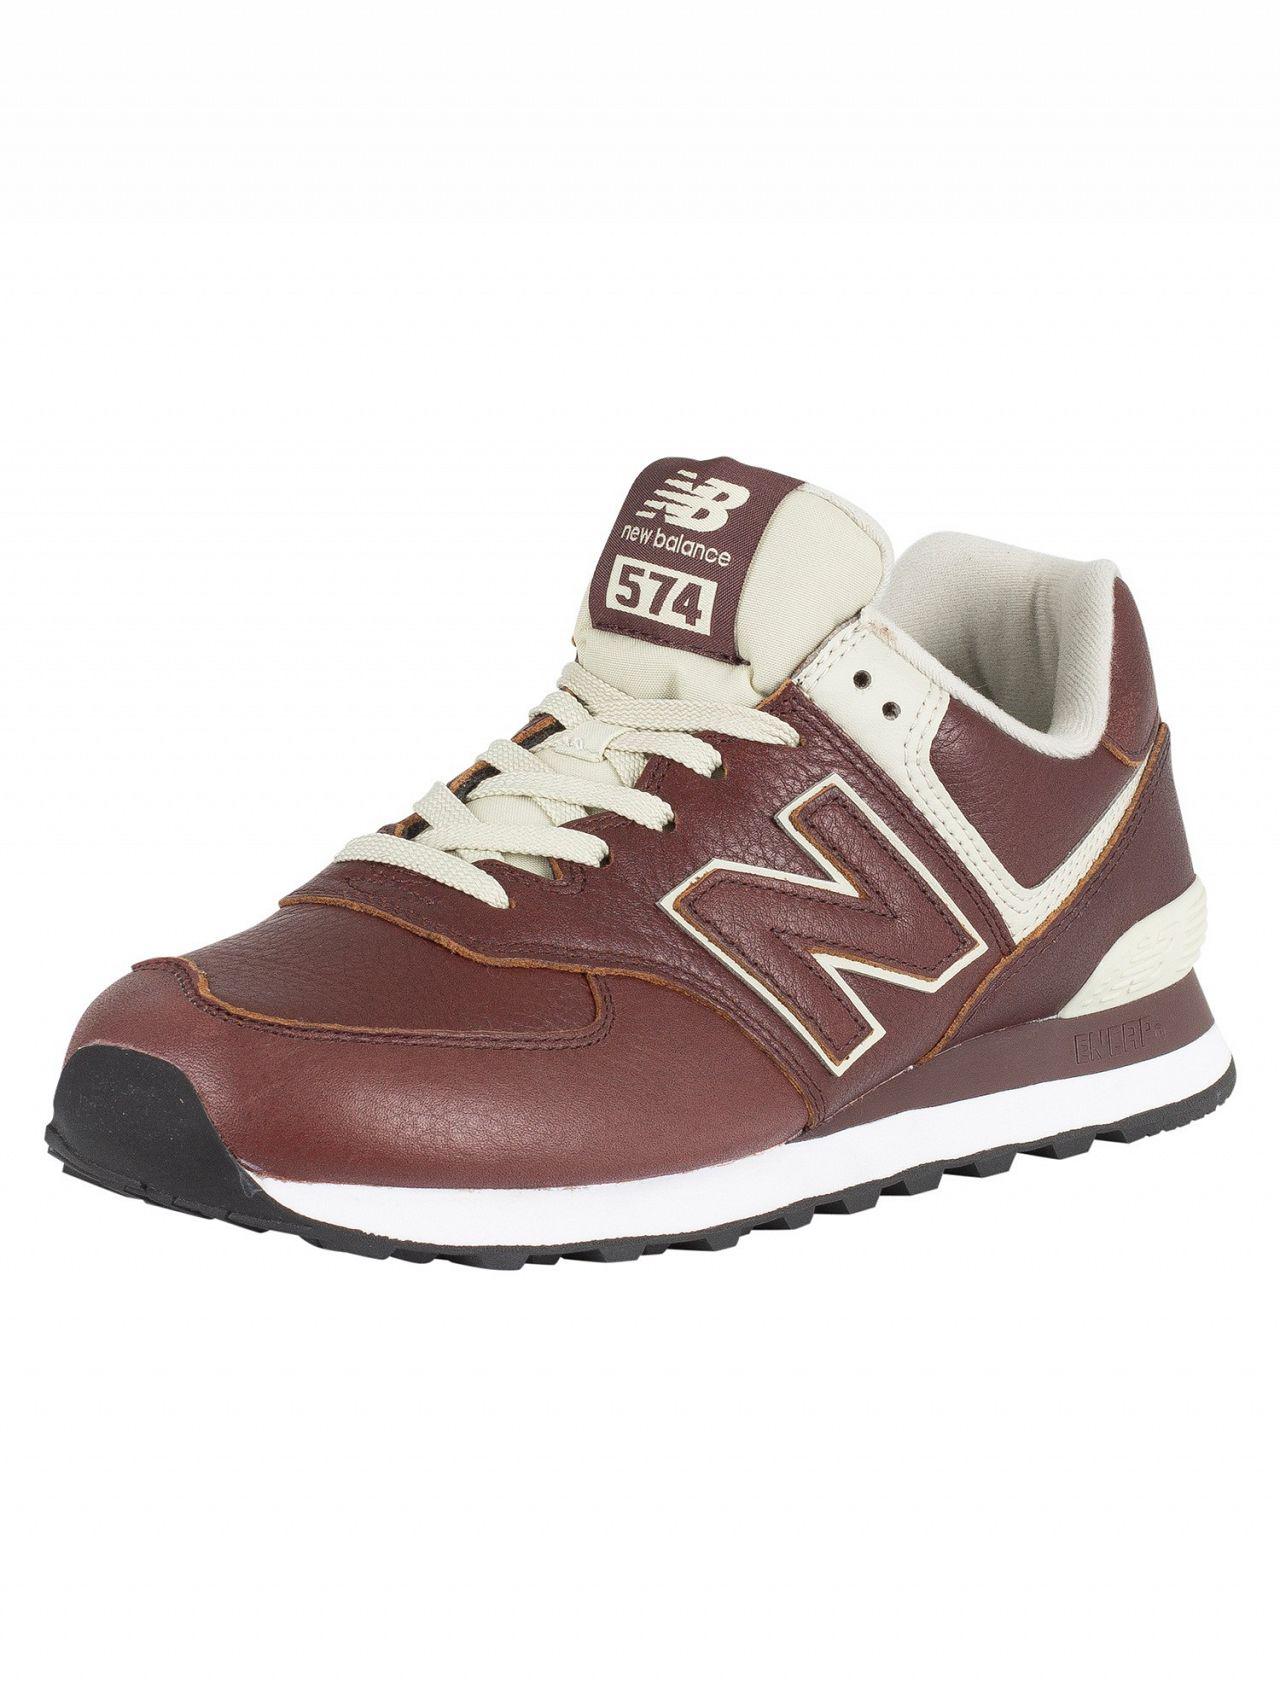 New Balance Cabernet/white Munsell 574 Leather Trainers for Men - Lyst